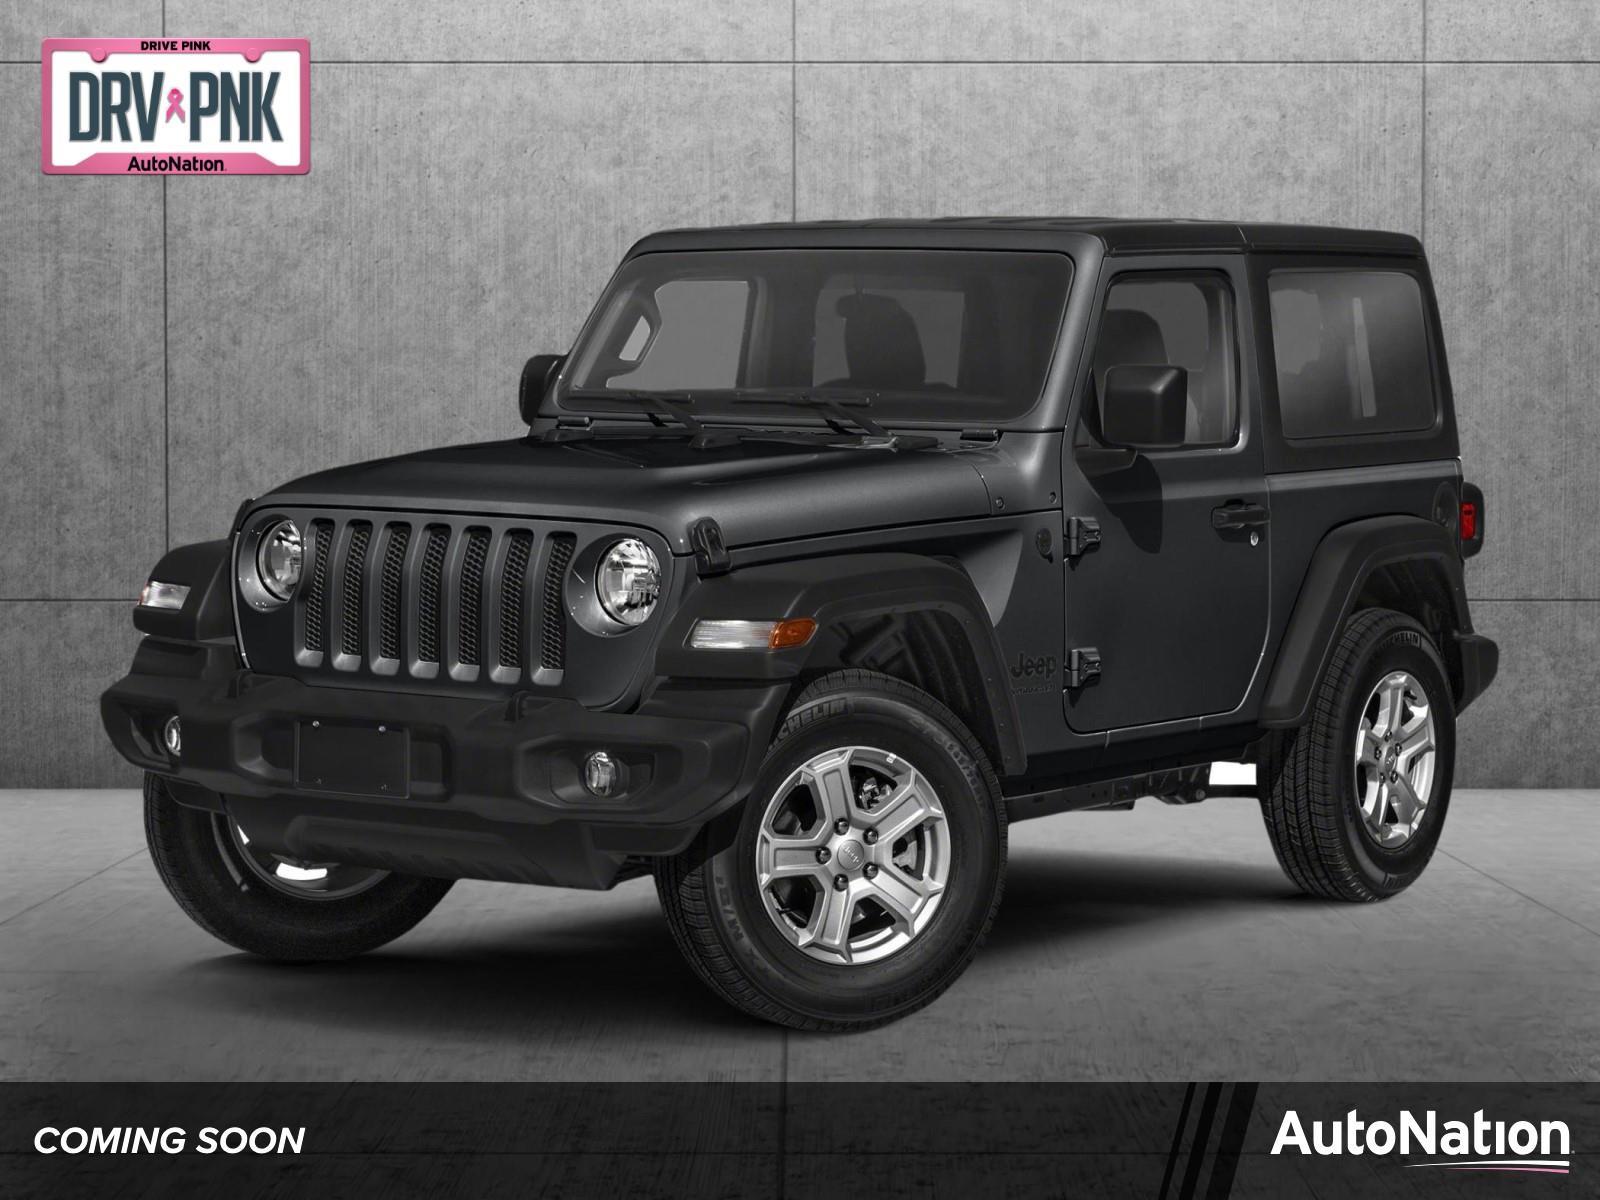 NEW 2023 Jeep Wrangler for sale in Fort Worth, TX 76177 - AutoNation